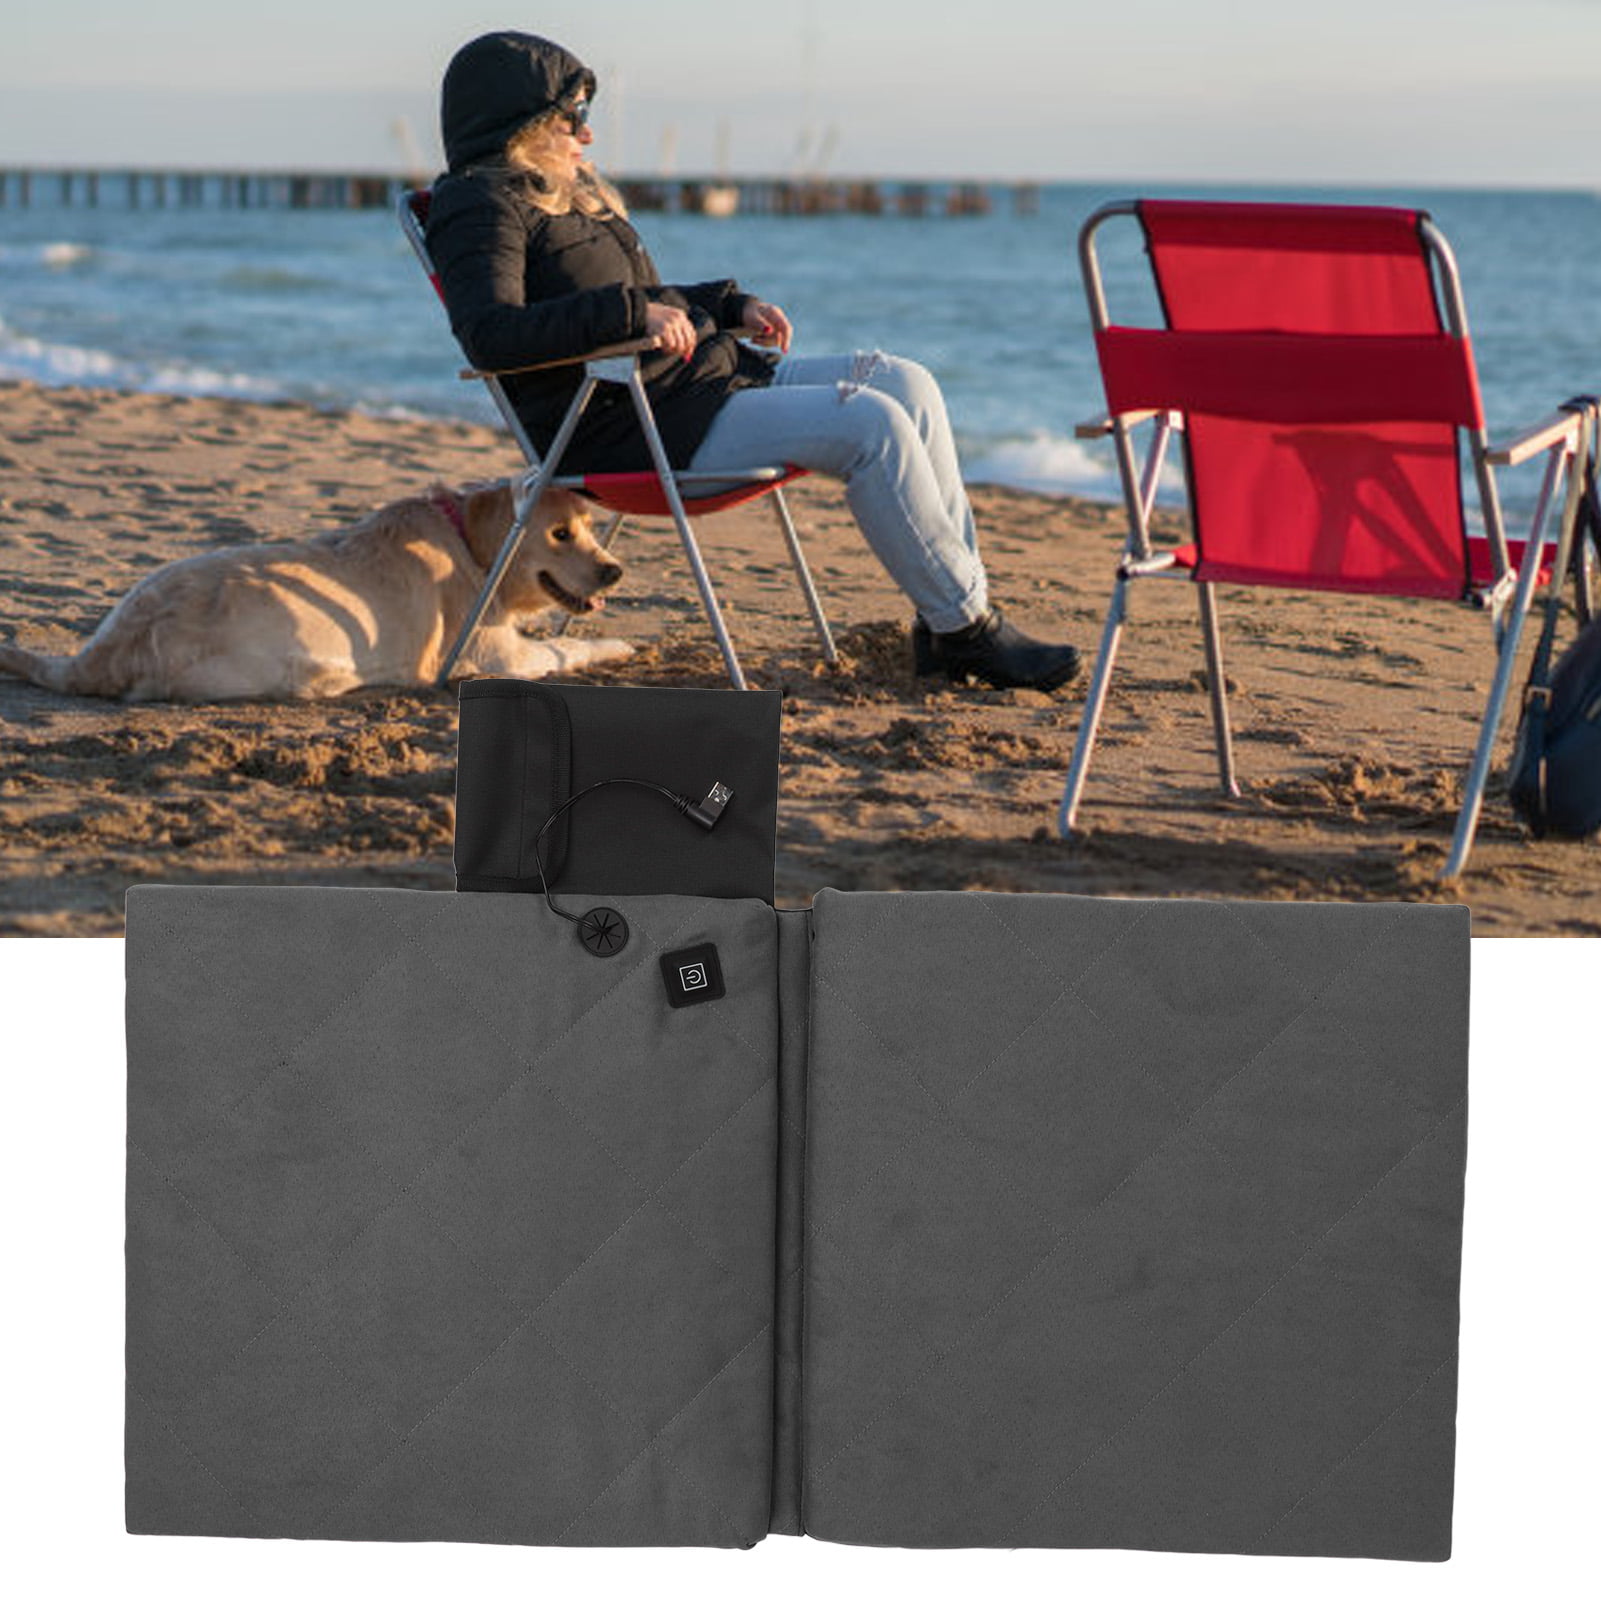 Heated Seat Cushion Cordless Rechargeable Stadium Seat Pad 149F USB Battery  Heated Bleacher Cushion Portable Heating Pad for Outdoor Camping $35. Free  for USA. Interested DM me for Details : r/AMZreviewTrader